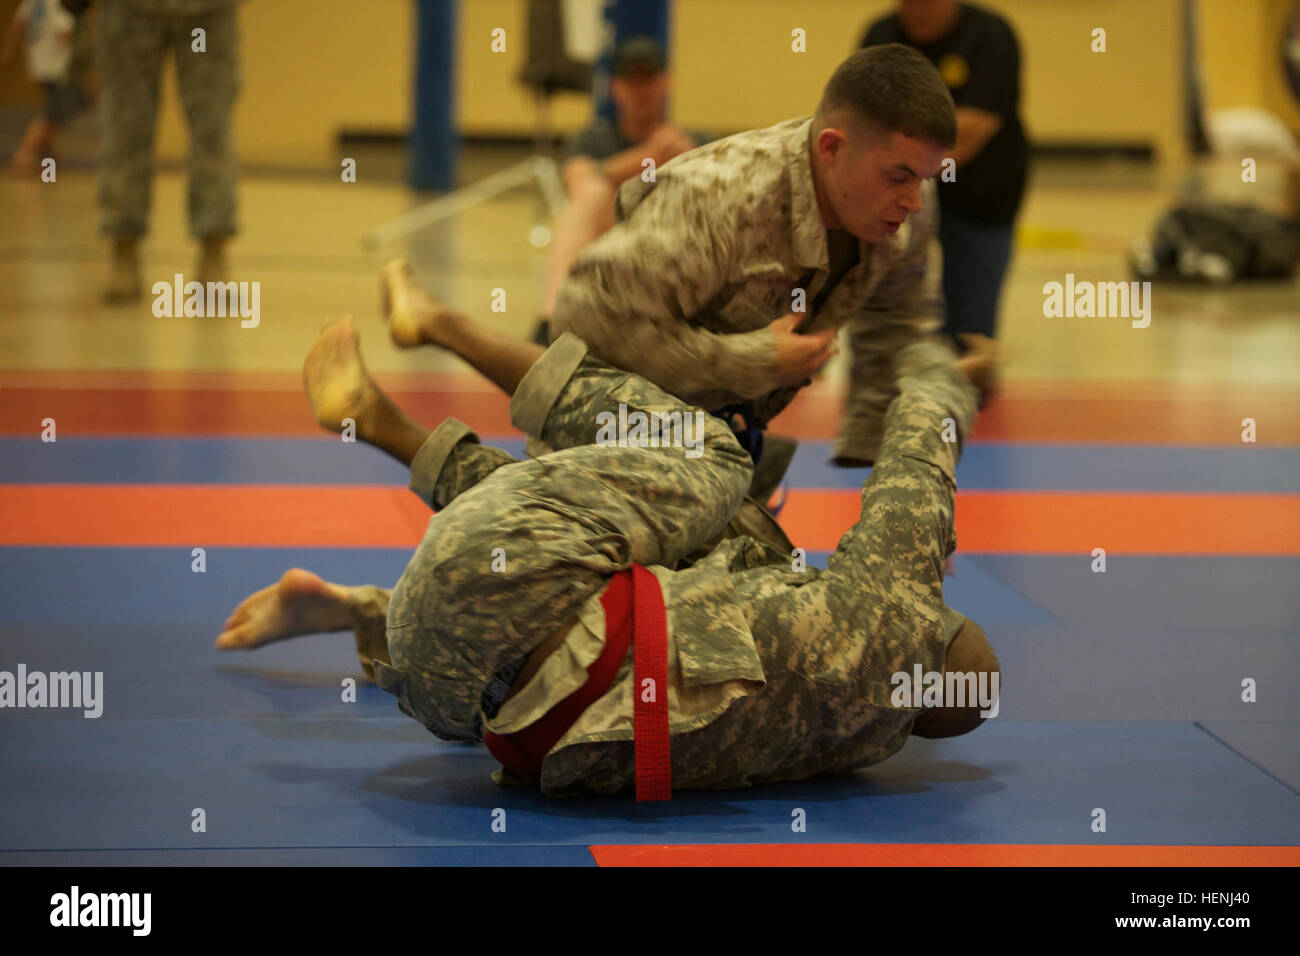 A U.S. Army Soldier and U.S. Marine fight head to head during an Army Combatives Tournament at Fort Dix, N.J., June 7, 2014. This tournament includes Soldiers, Airmen and Marines competing in different weight classes for a chance to win the title. (U.S. Army photo by Sgt. Austin Berner/Released) 98th Division Army Combatives Tournament 140607-A-BZ540-205 Stock Photo